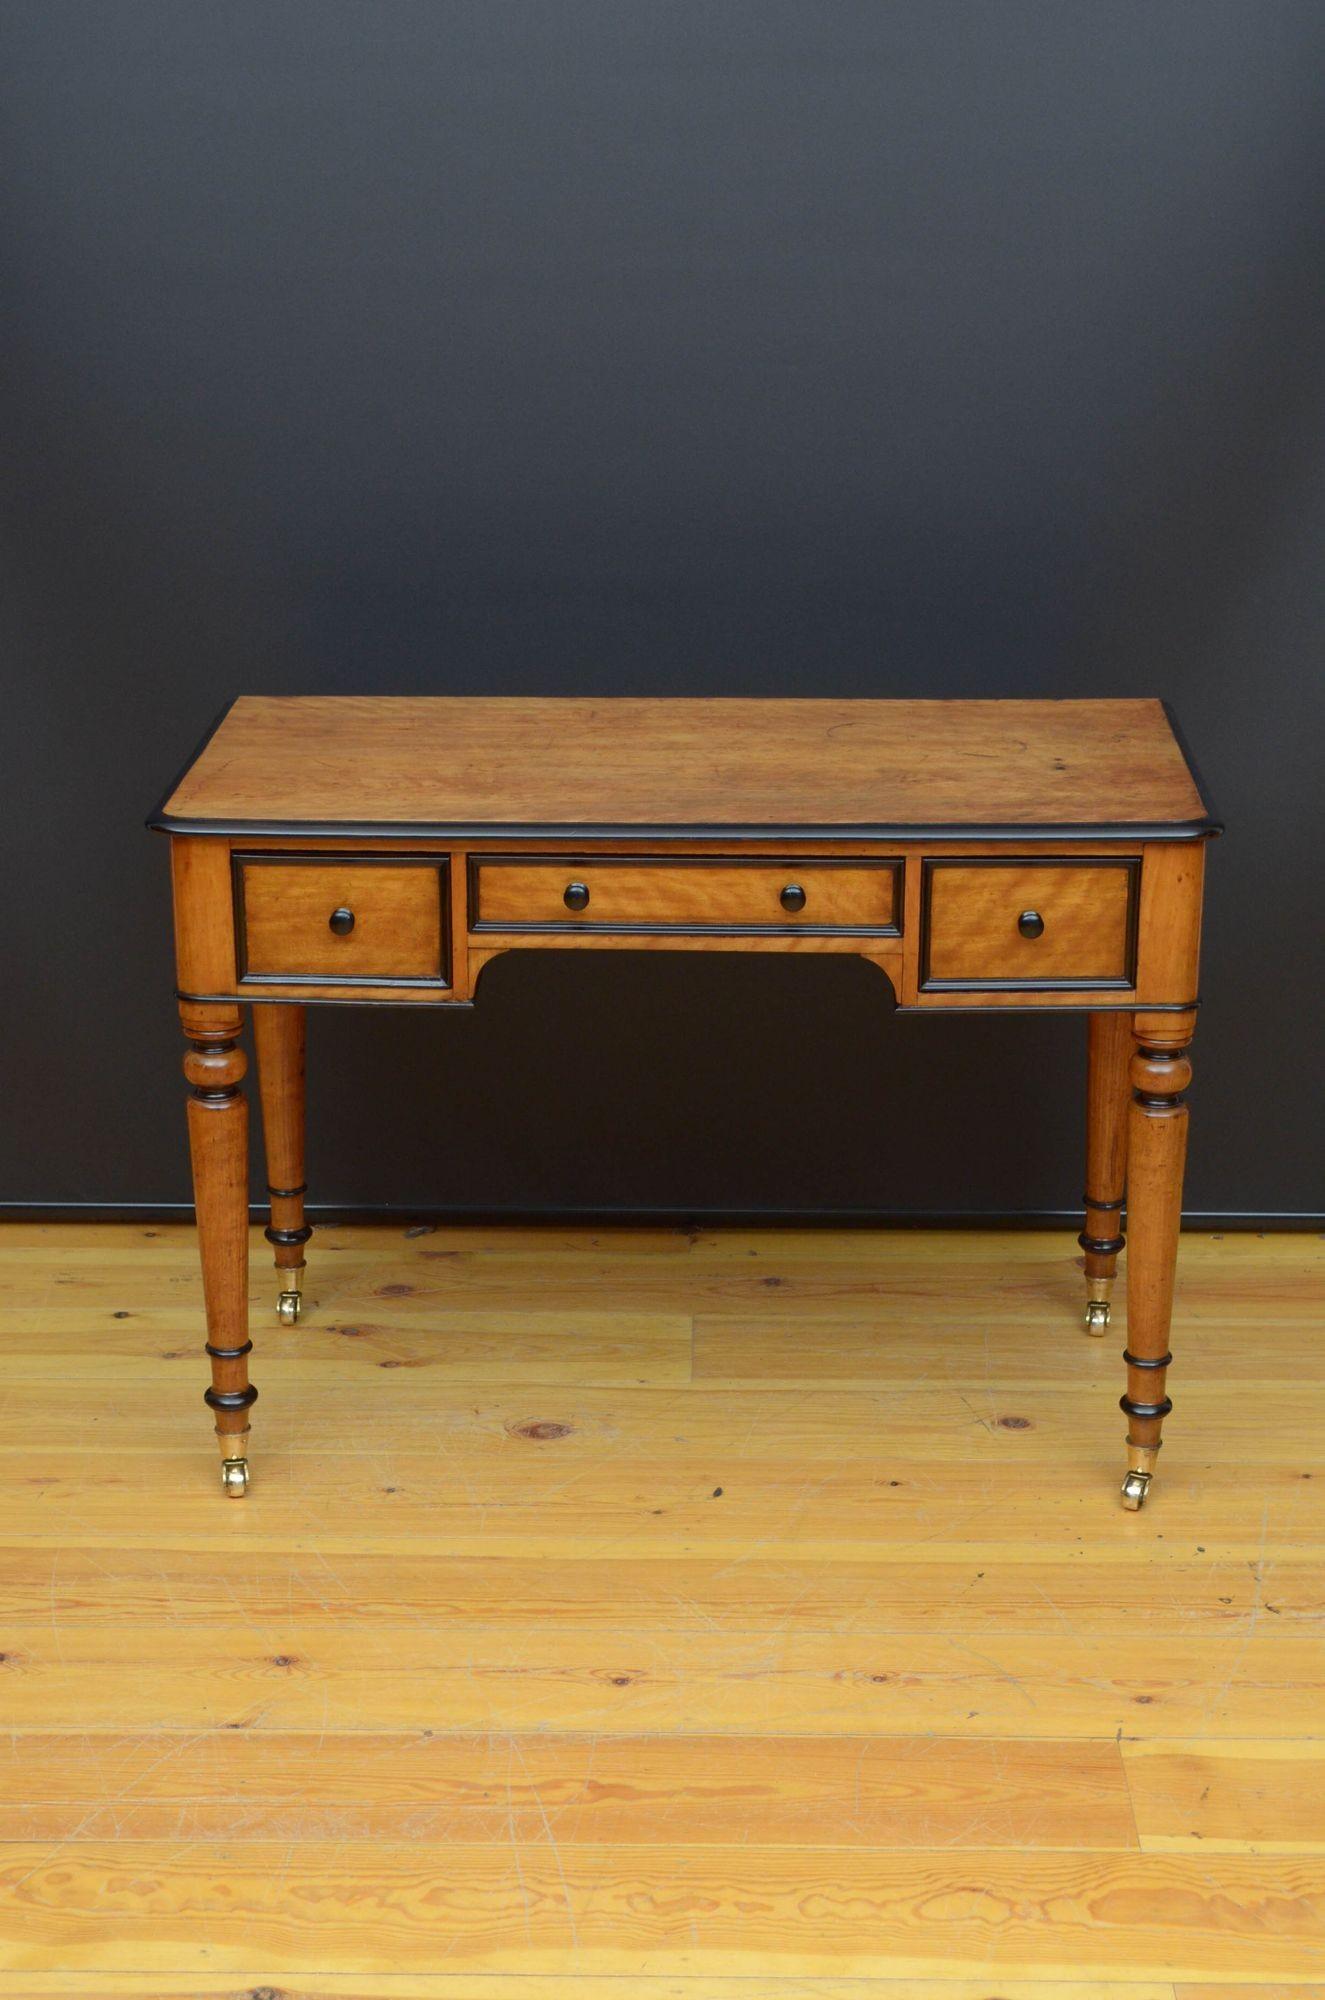 ST039 Attractive Victorian satin birch dressing table or writing table, having oversailing top with ebonised edge and three frieze drawers with ebonised turned knobs, all standing on turned tapered legs terminating in original brass castors. This